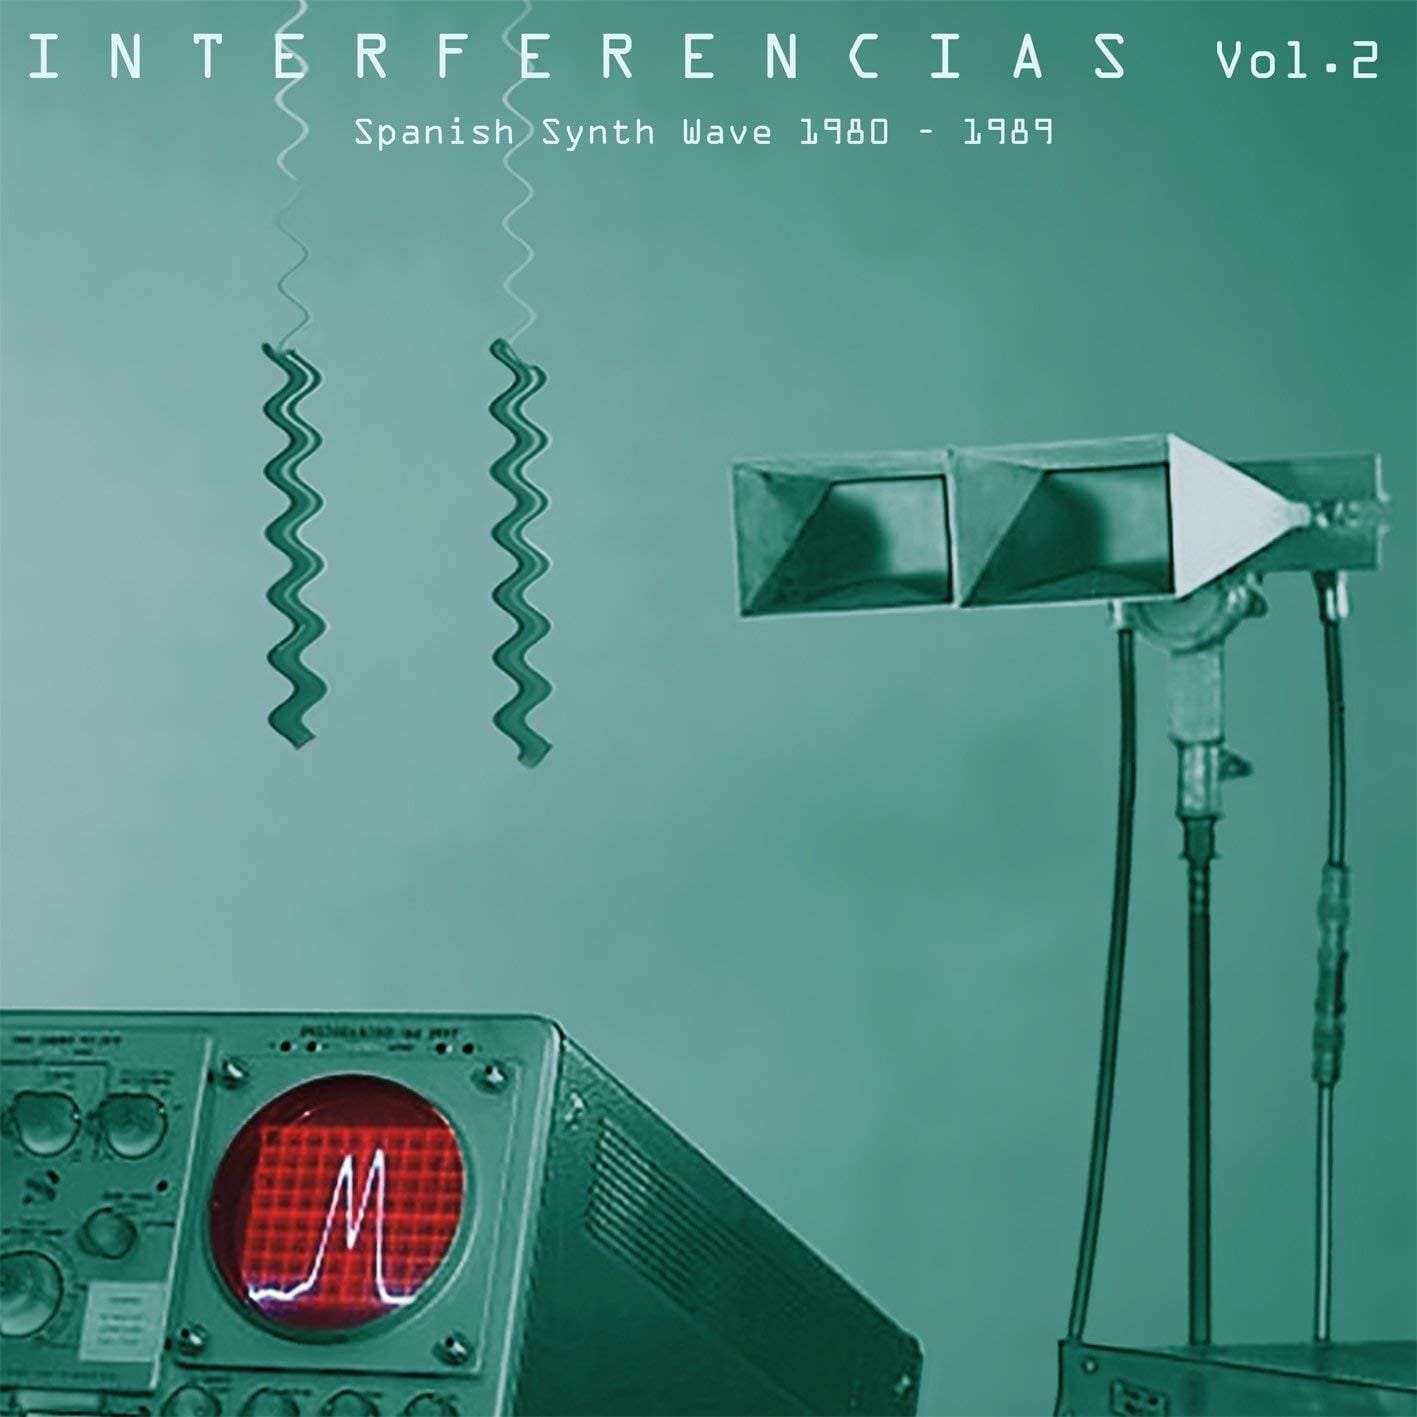 Spanish Synthpop of the ’80s Strikes Again with ‘Interferencias Volume 2’